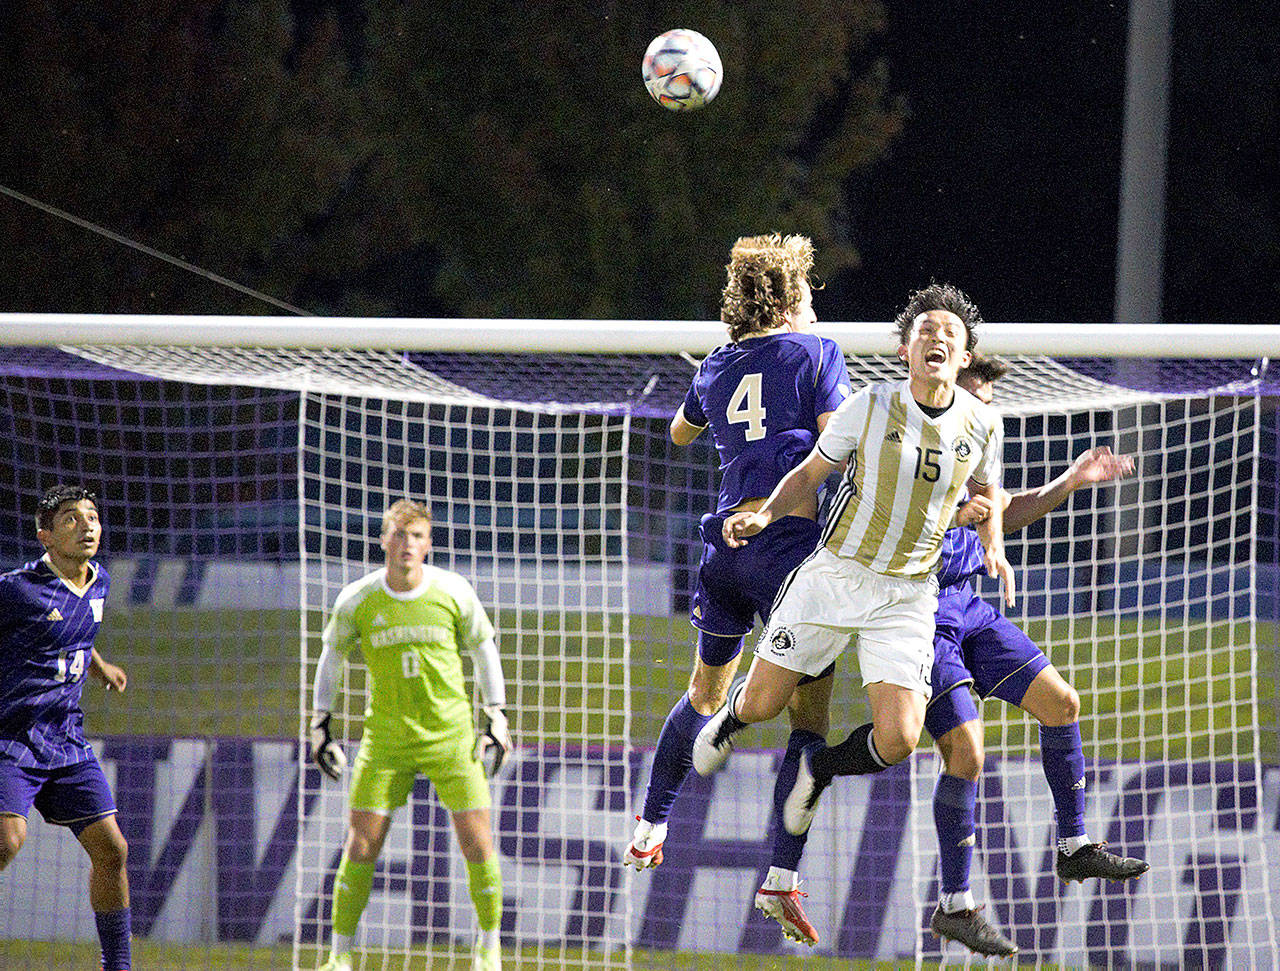 Rick Ross/Peninsula College Peninsula College’s Chunghwan Lee (15), goes up for a header against the University of Washington’s Ryan Sailor (4) in a scrimmage played Sunday at the University of Washington.